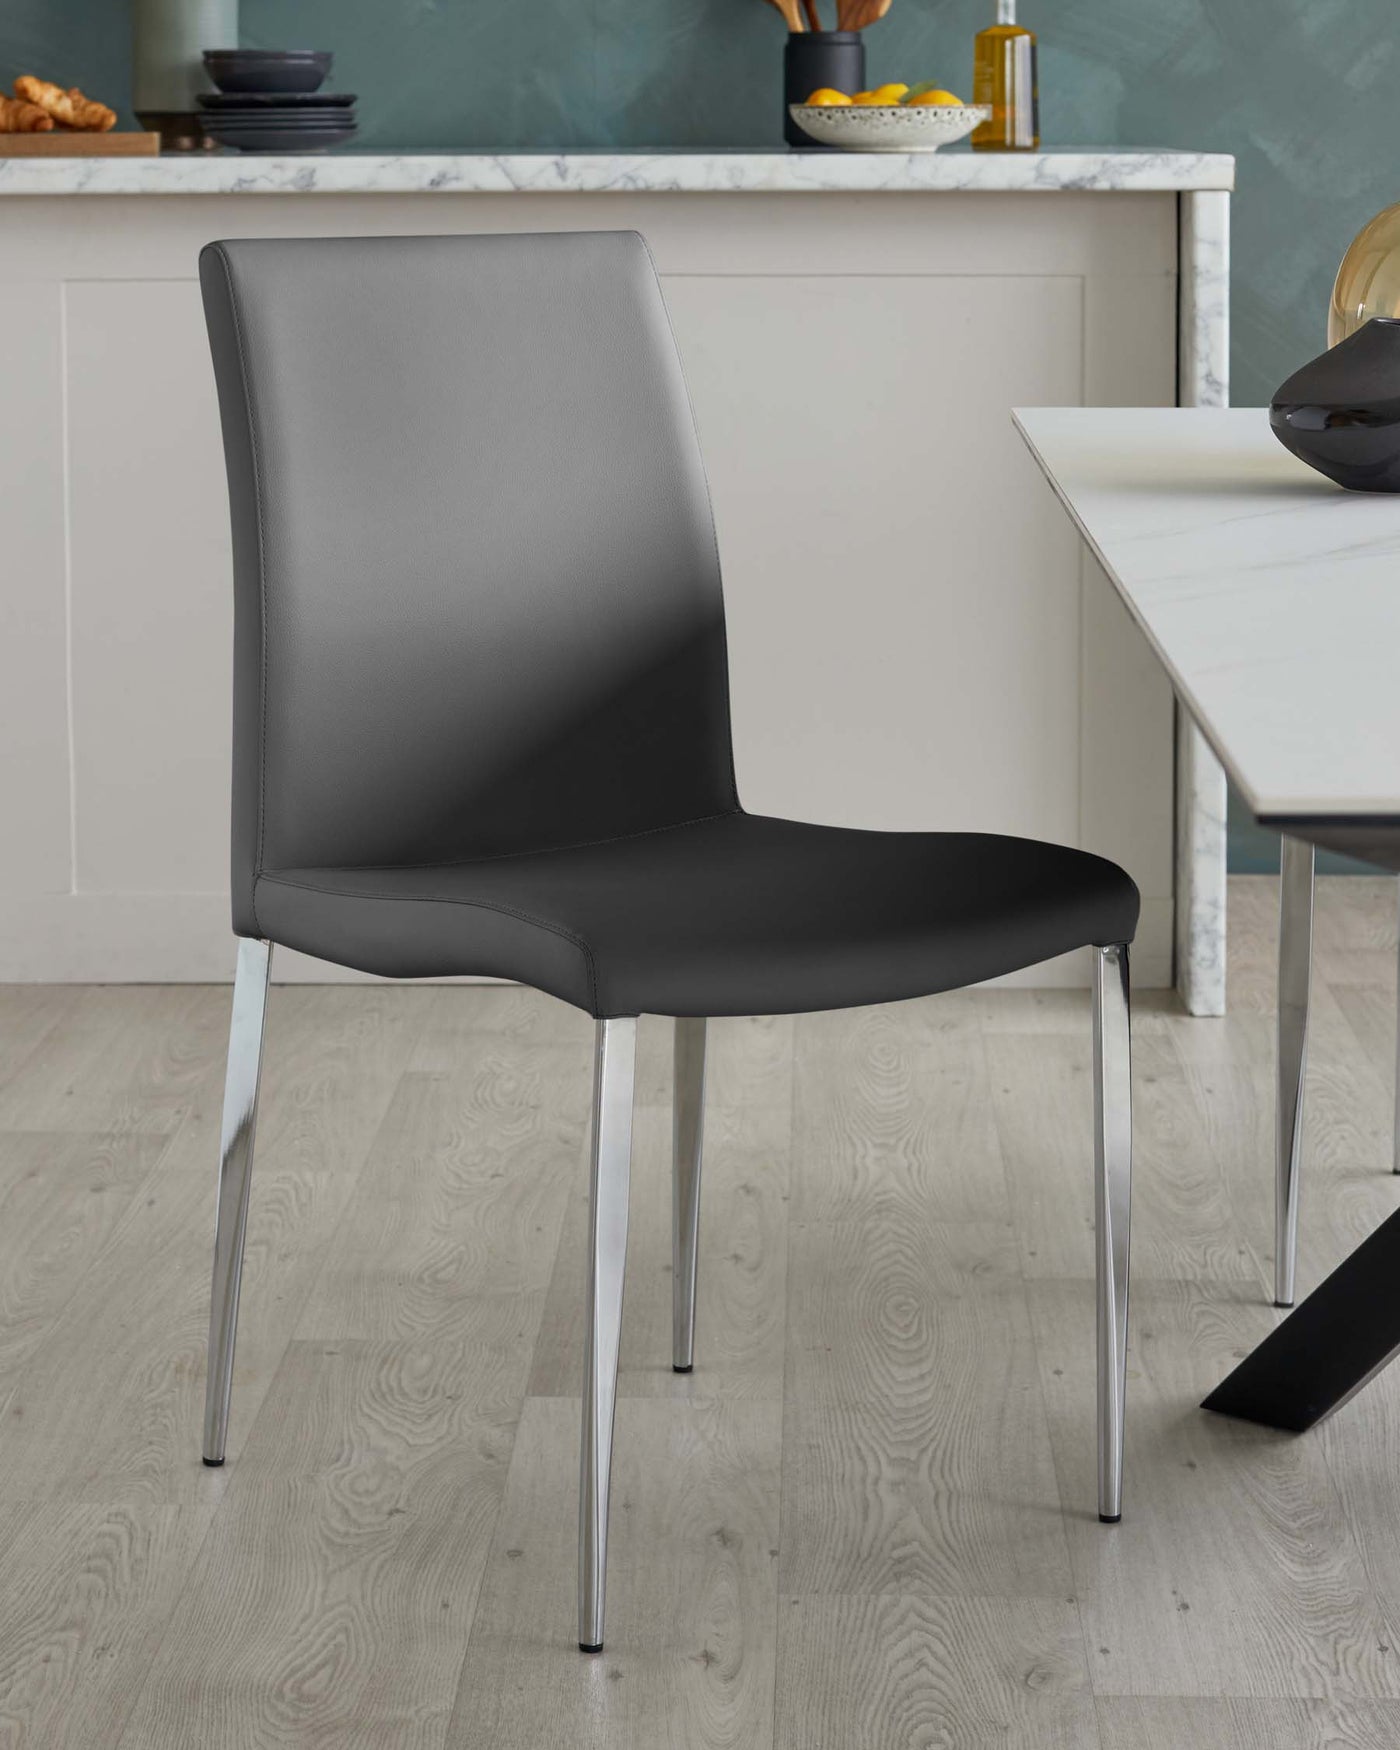 Modern dining chair with a sleek, dark grey faux leather upholstery and four polished chrome legs. The chair has a minimalist design with a slightly curved backrest and a padded seat for comfort.